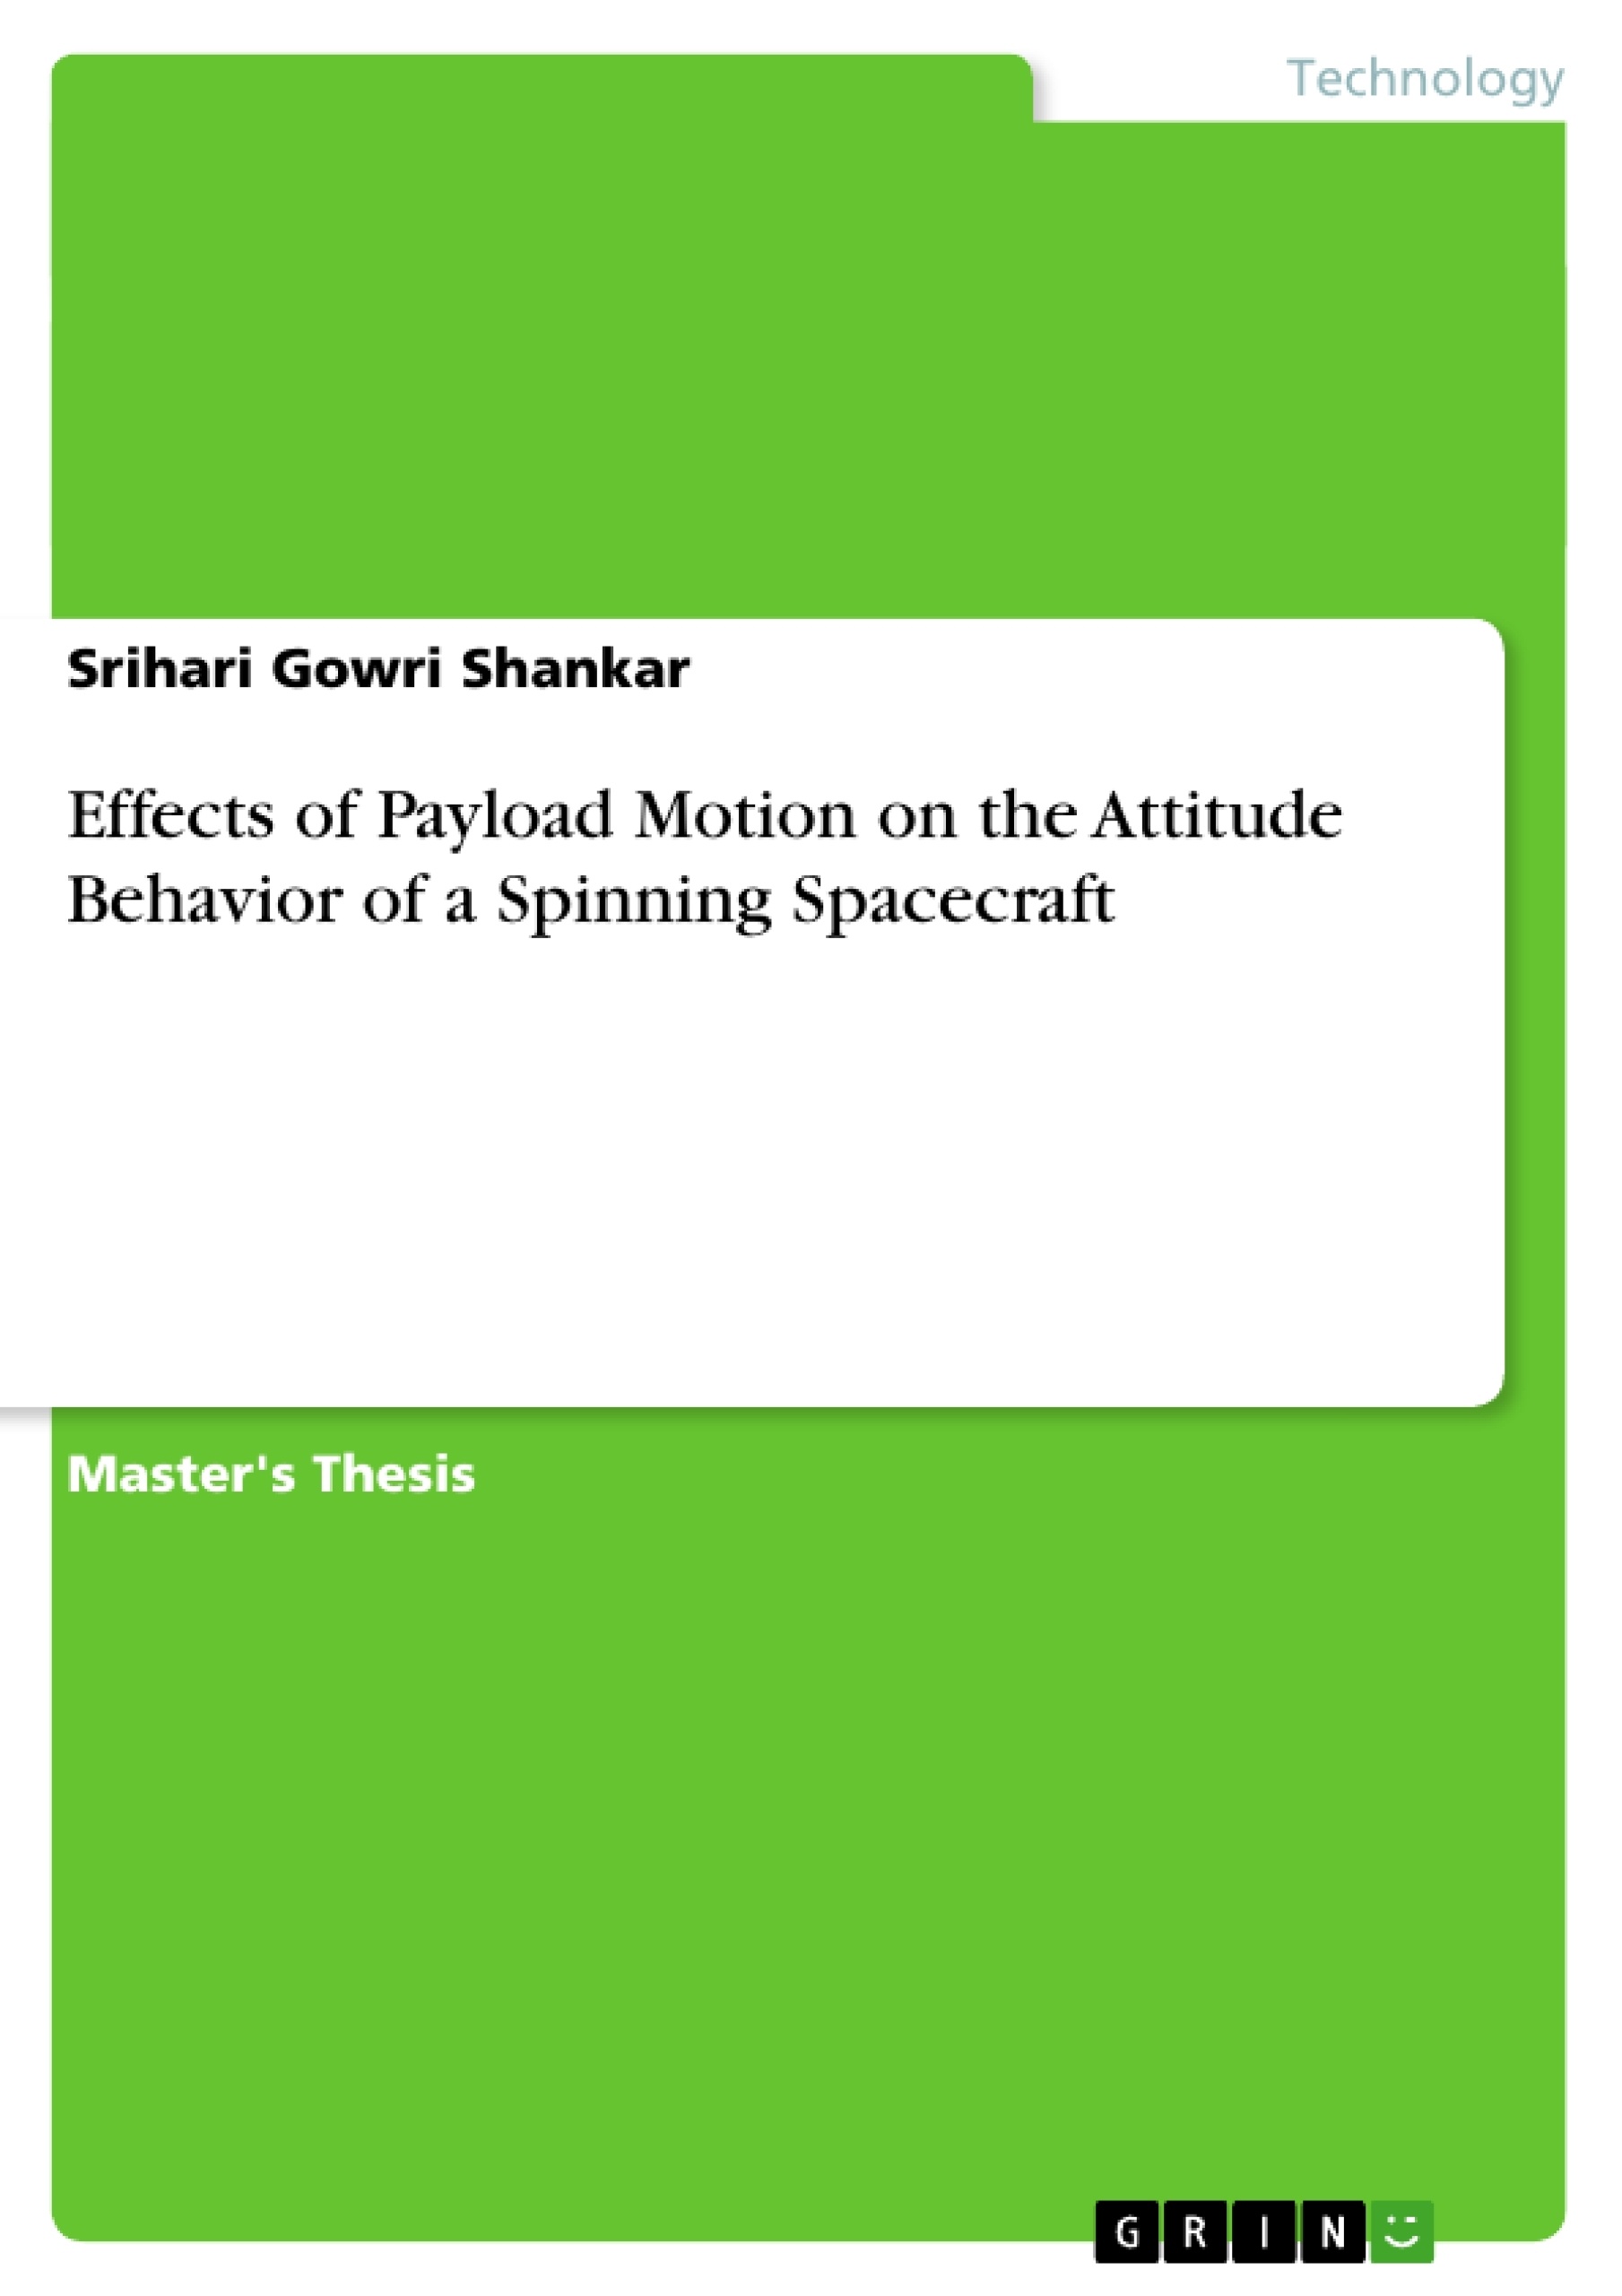 Title: Effects of Payload Motion on the Attitude Behavior of a Spinning Spacecraft